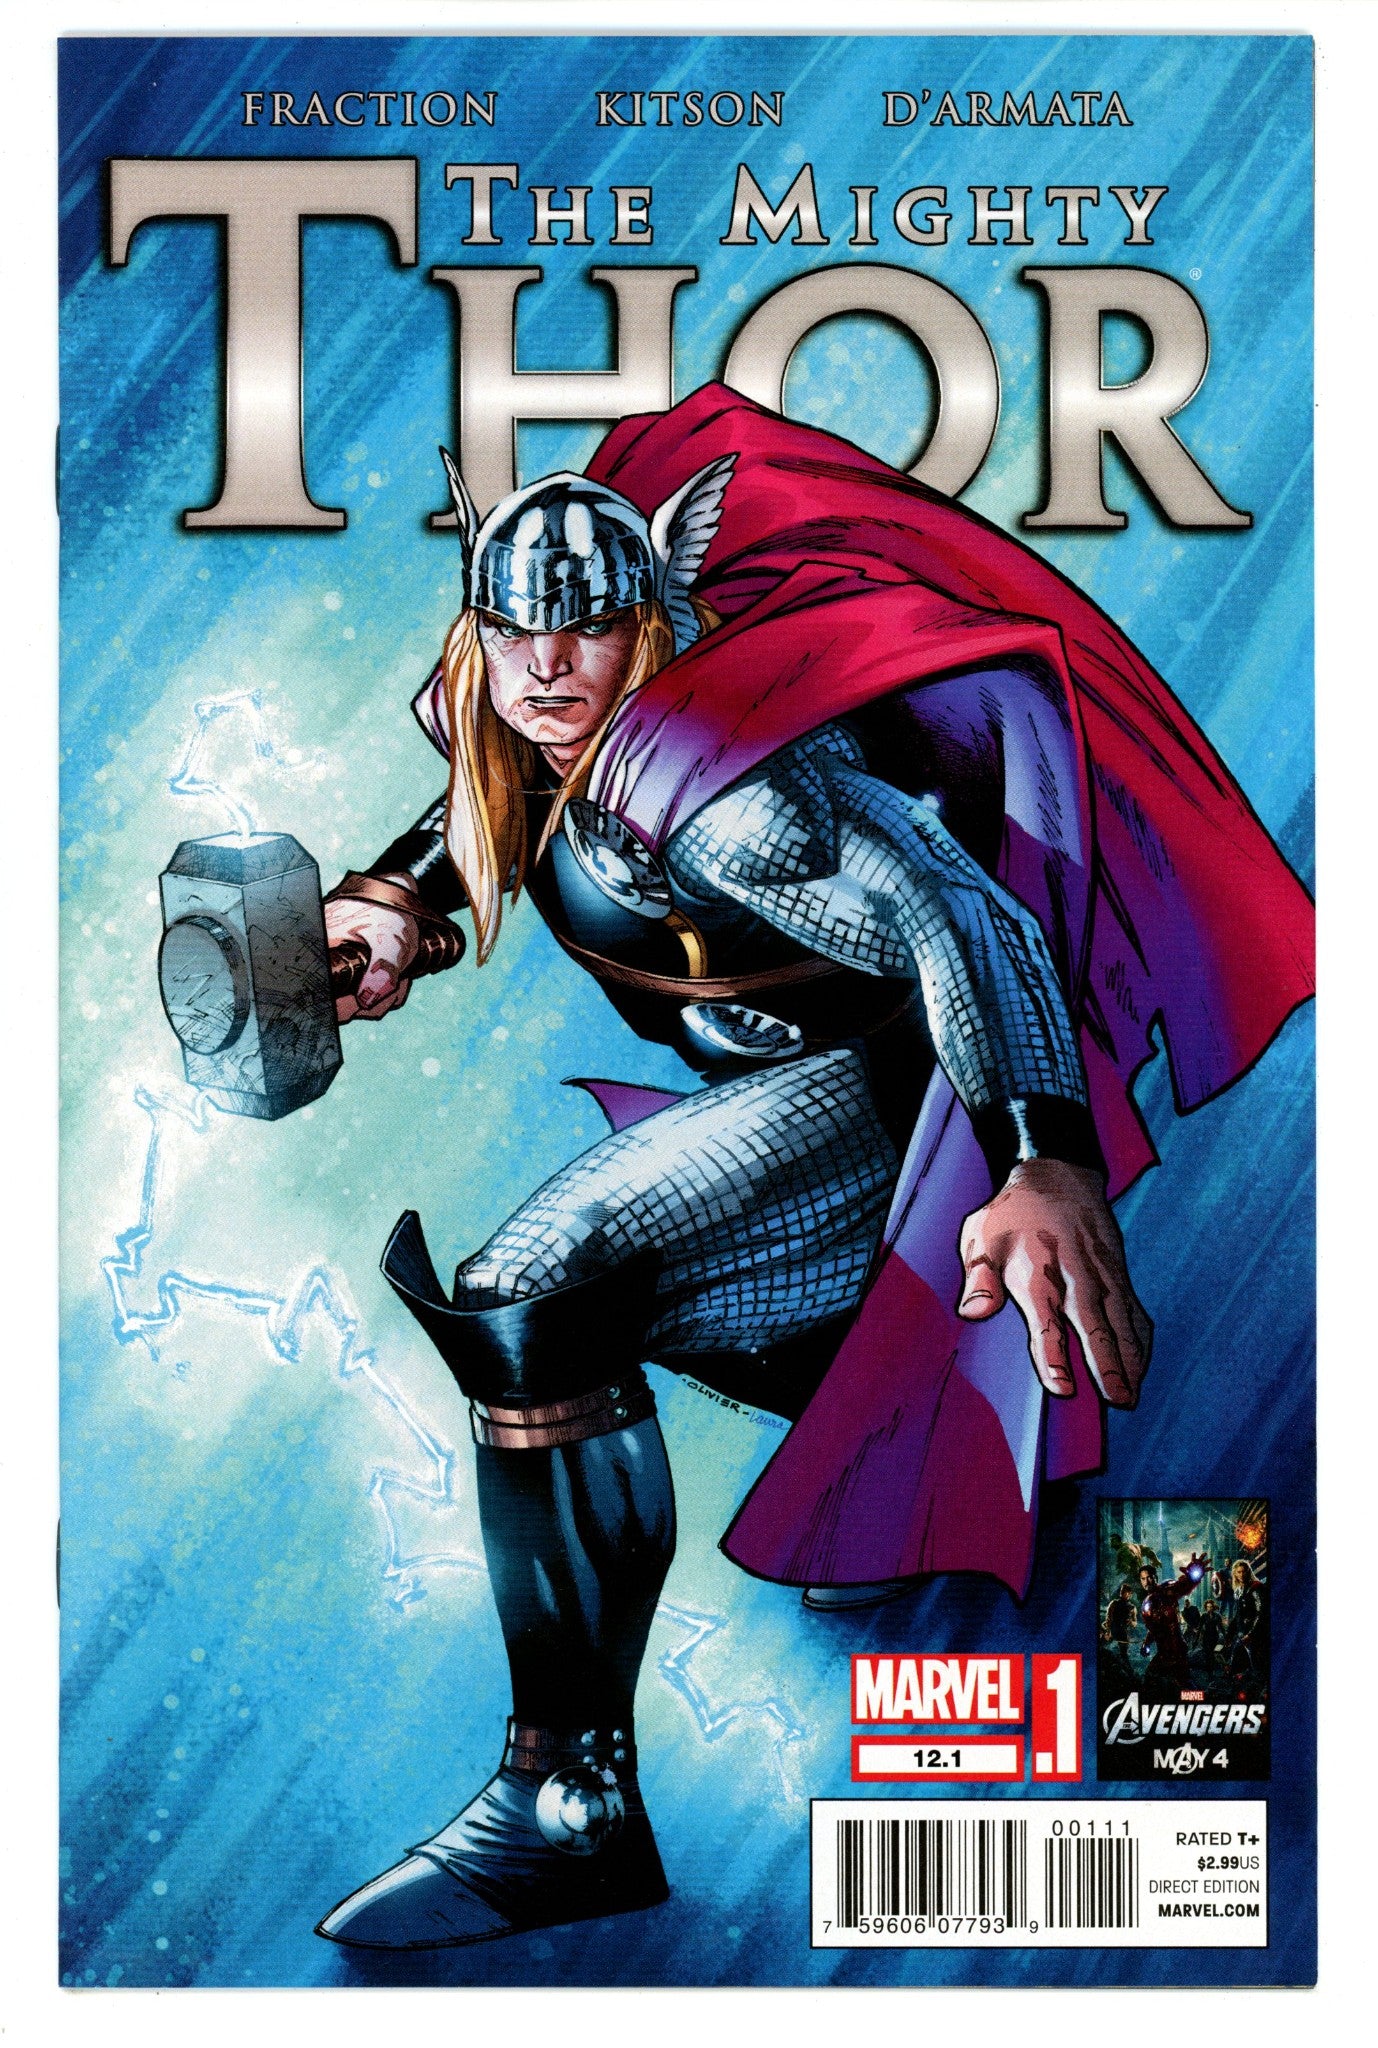 The Mighty Thor Vol 1 12.1 High Grade (2012) 